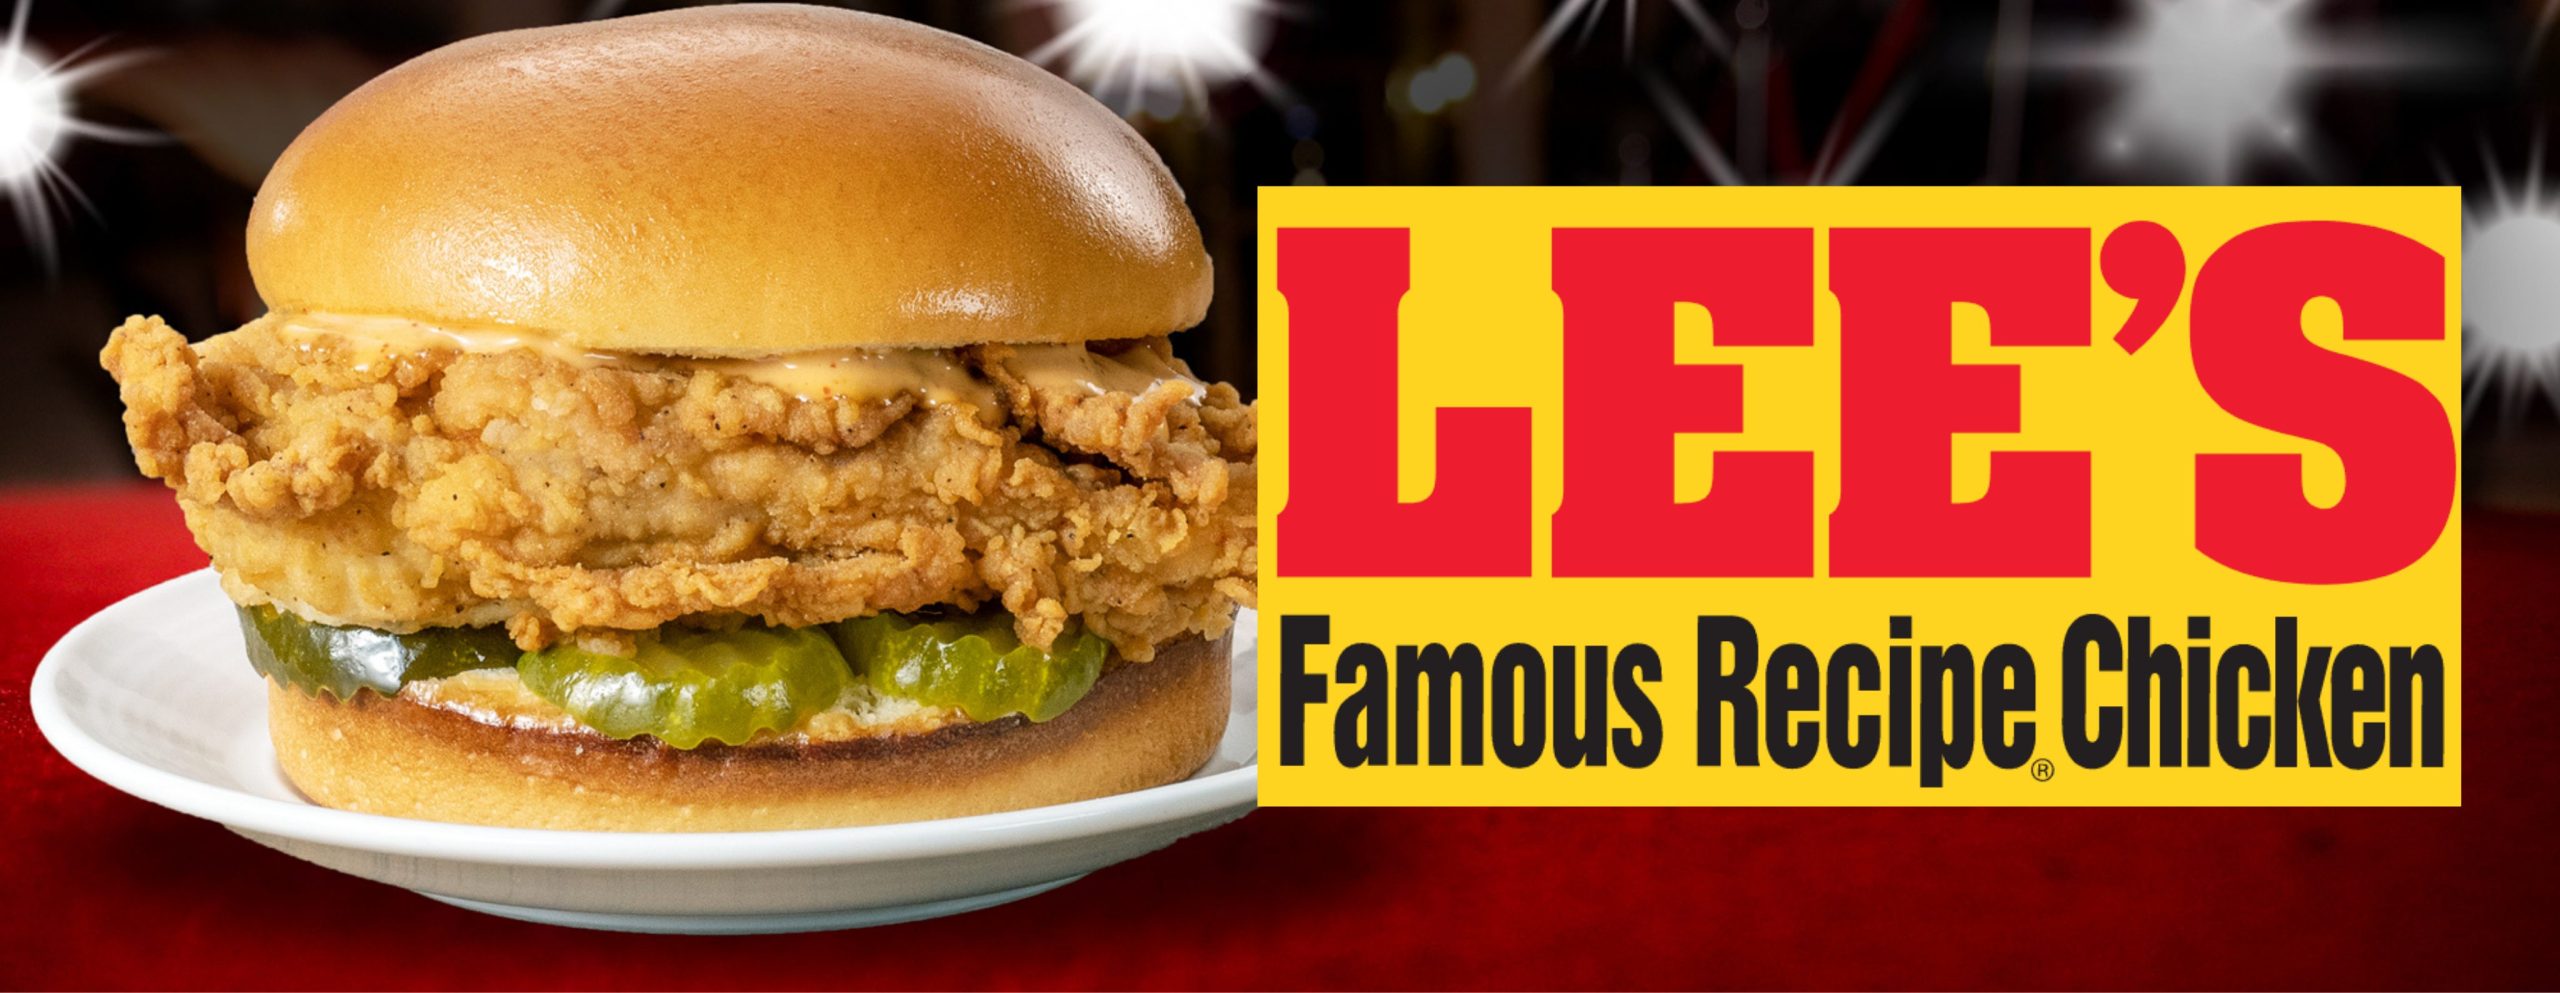 Lee’s Famous Recipe Chicken Accepts KFC’s #ChickenSandwichWars Challenge to Prevent Childhood Hunger